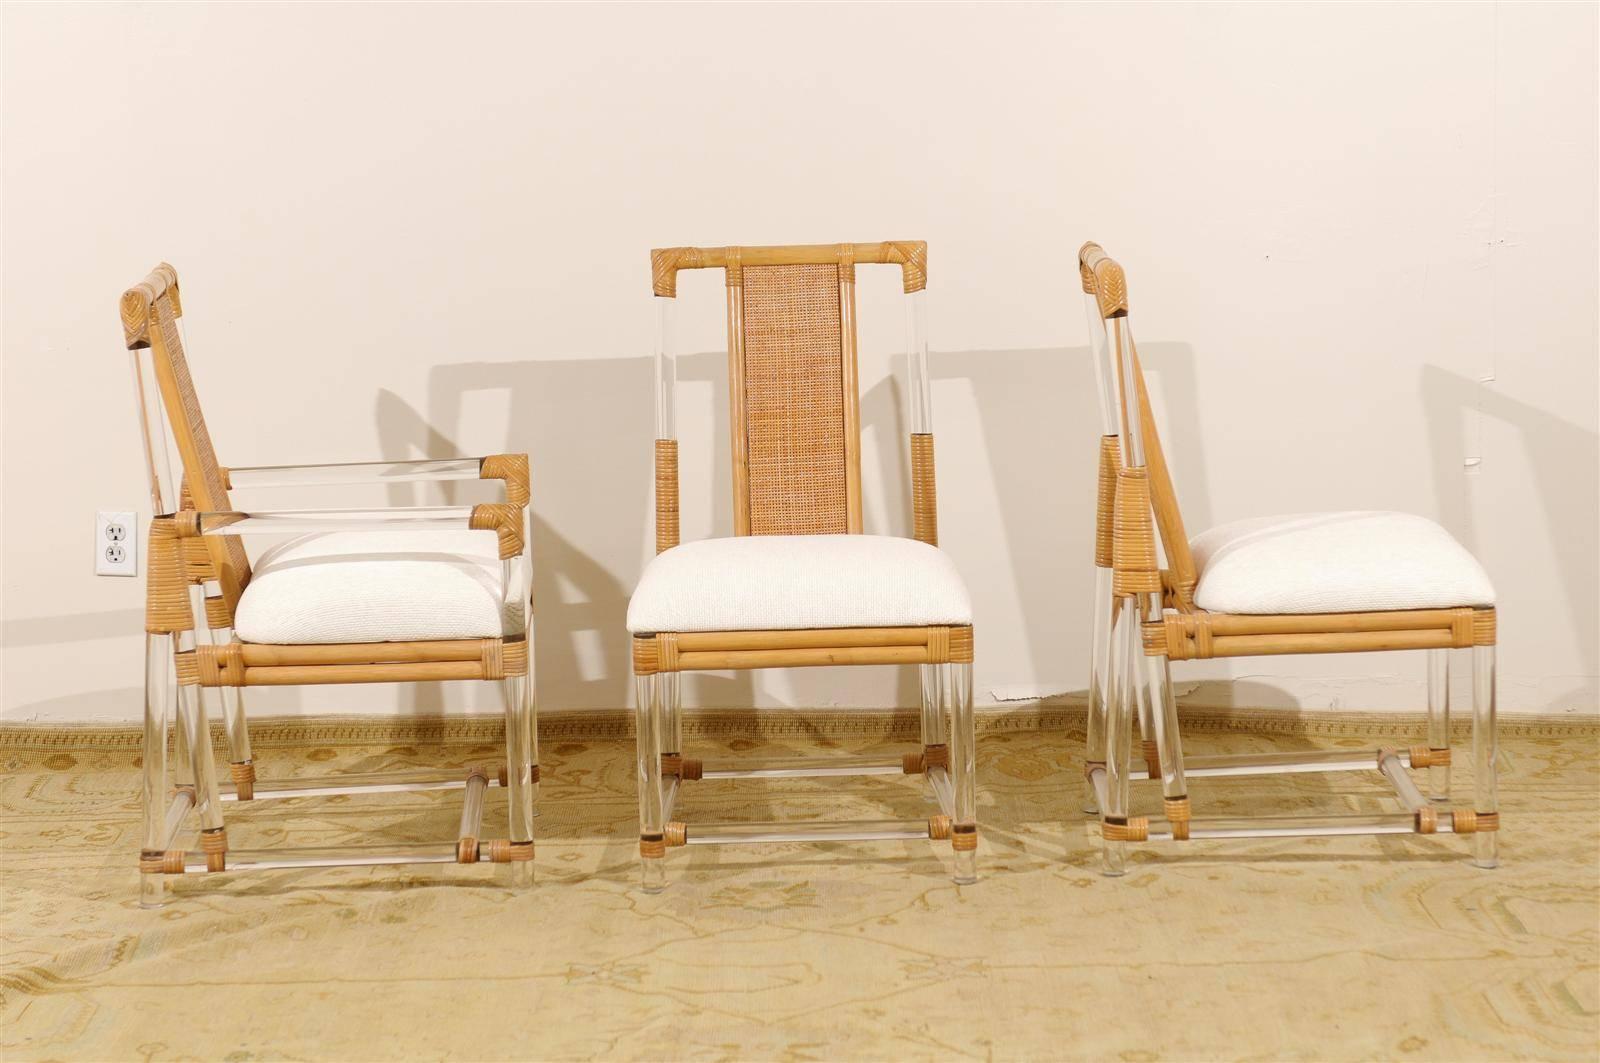 Staggering Restored Set of 8 Iconic Lucite and Rattan Dining Chairs, circa 1975 2